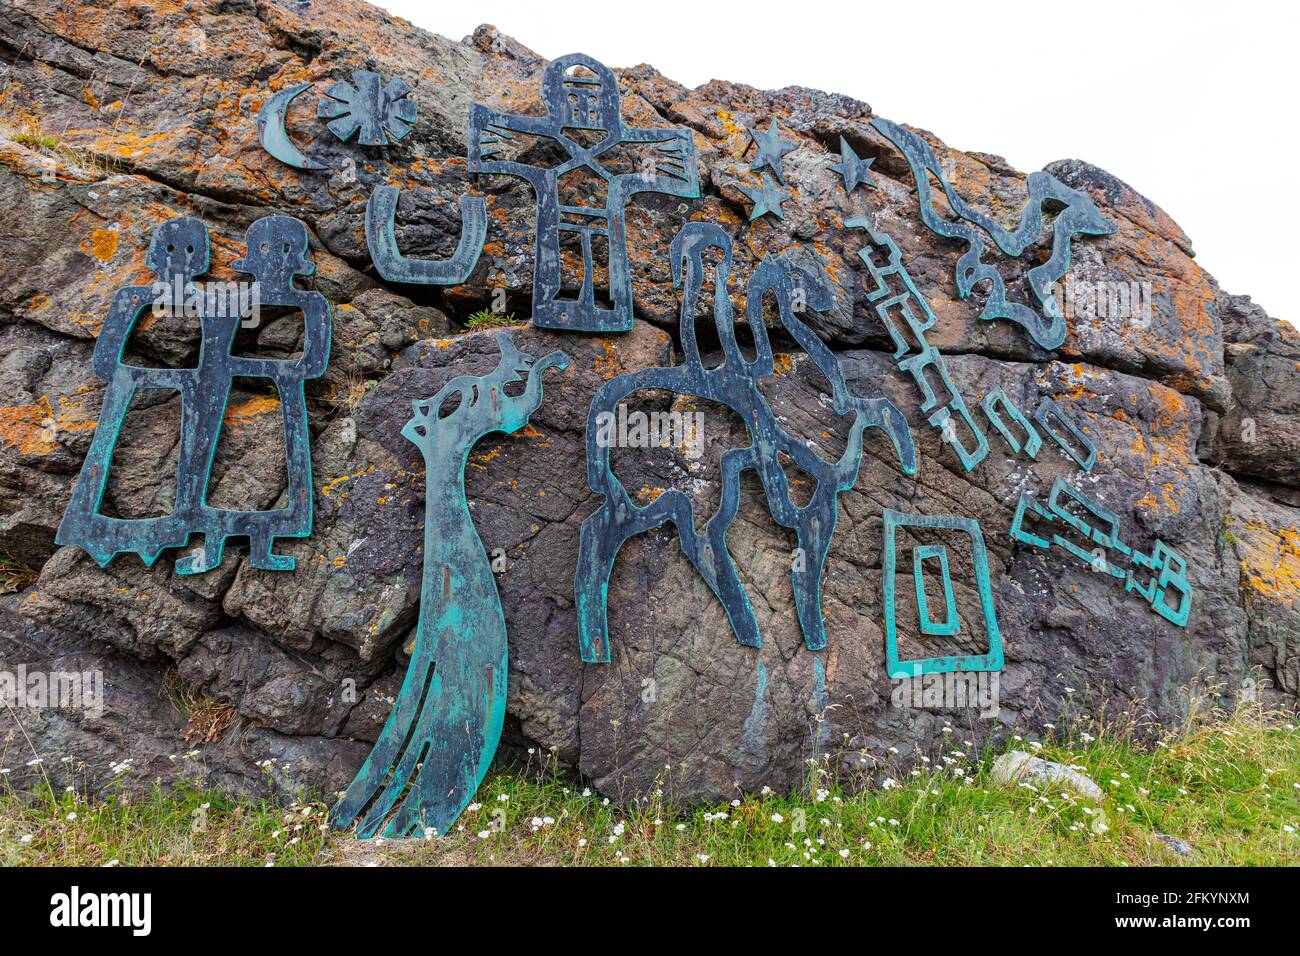 Iron sculptures at the reconstruction of Erik the Red’s Norse settlement at Brattahlid, southwestern Greenland. Stock Photo